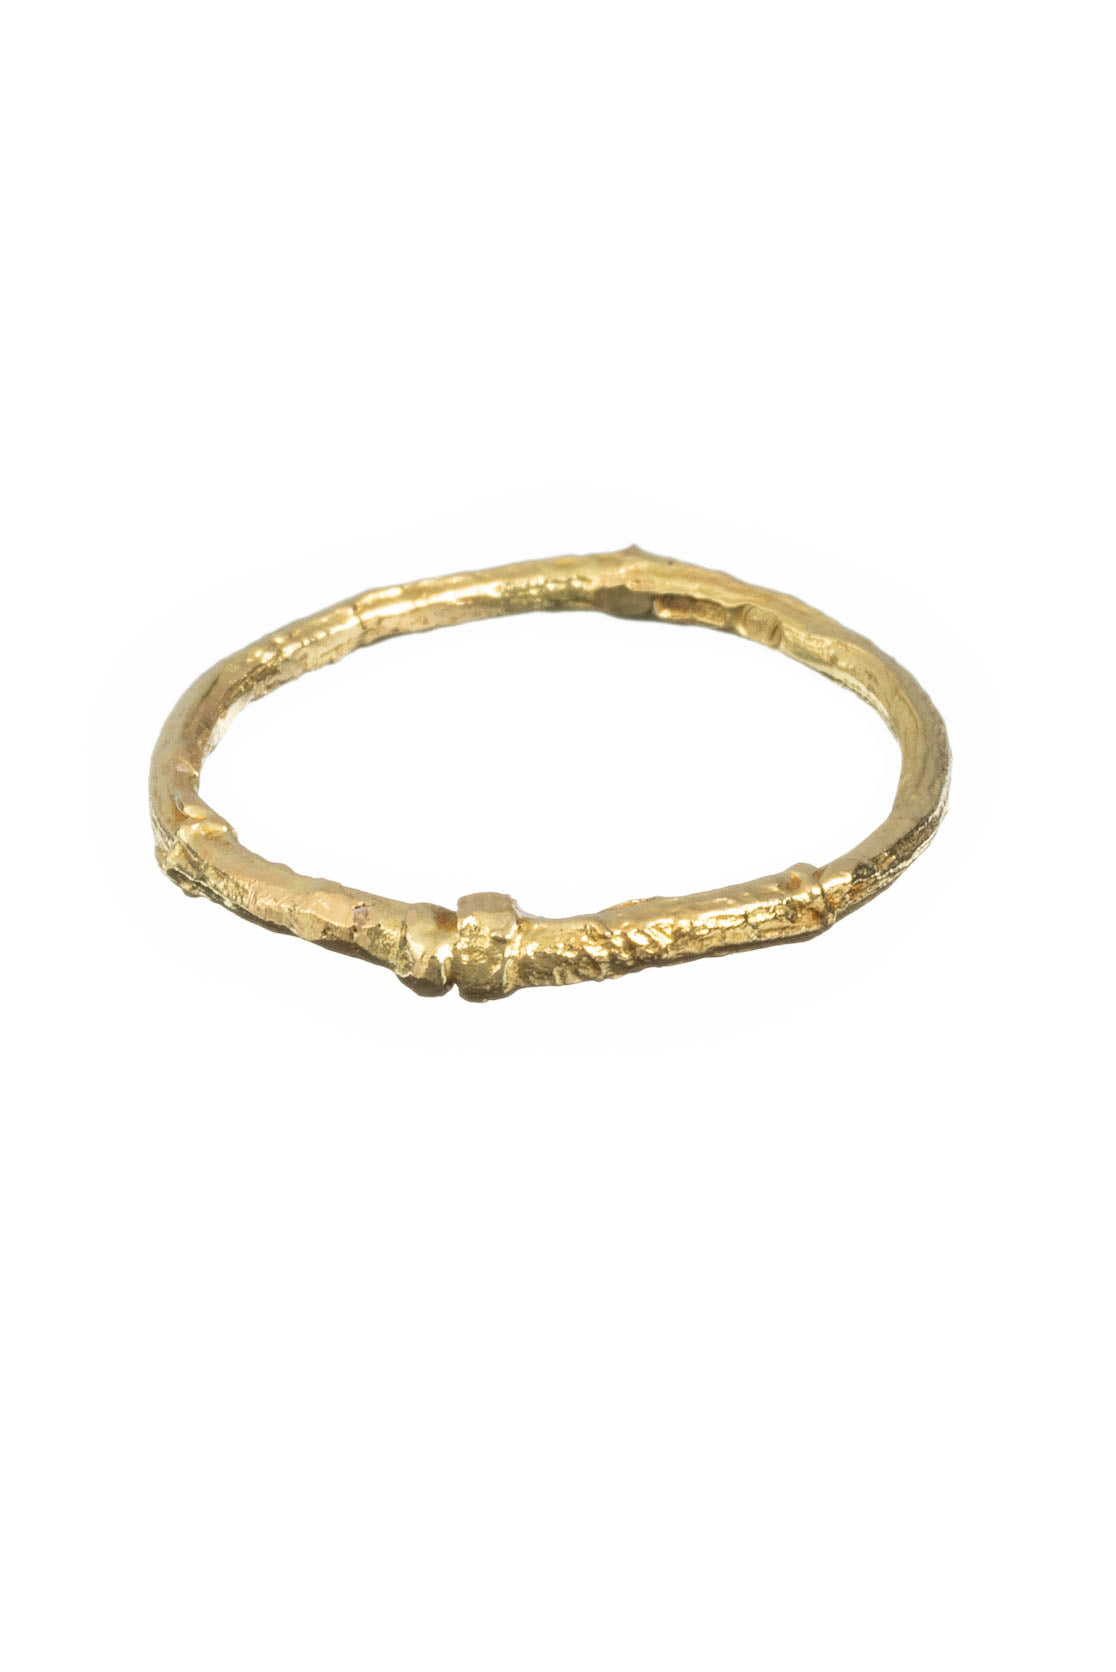 Twig Ring In Solid 18ct Yellow, White, and Rose Gold